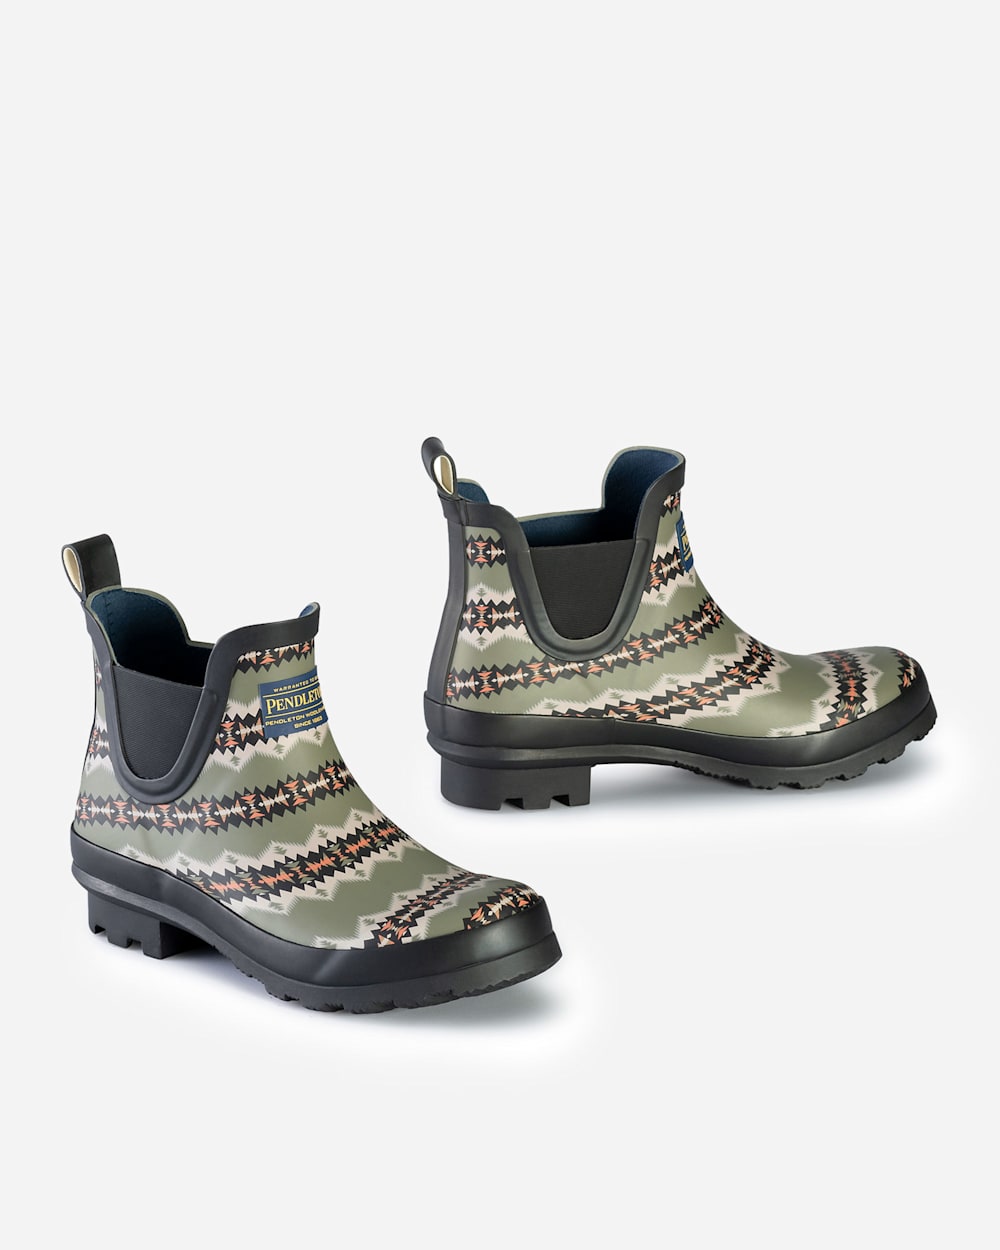 ALTERNATE VIEW OF WOMEN'S SONORA CHELSEA BOOTS IN OLIVE image number 2